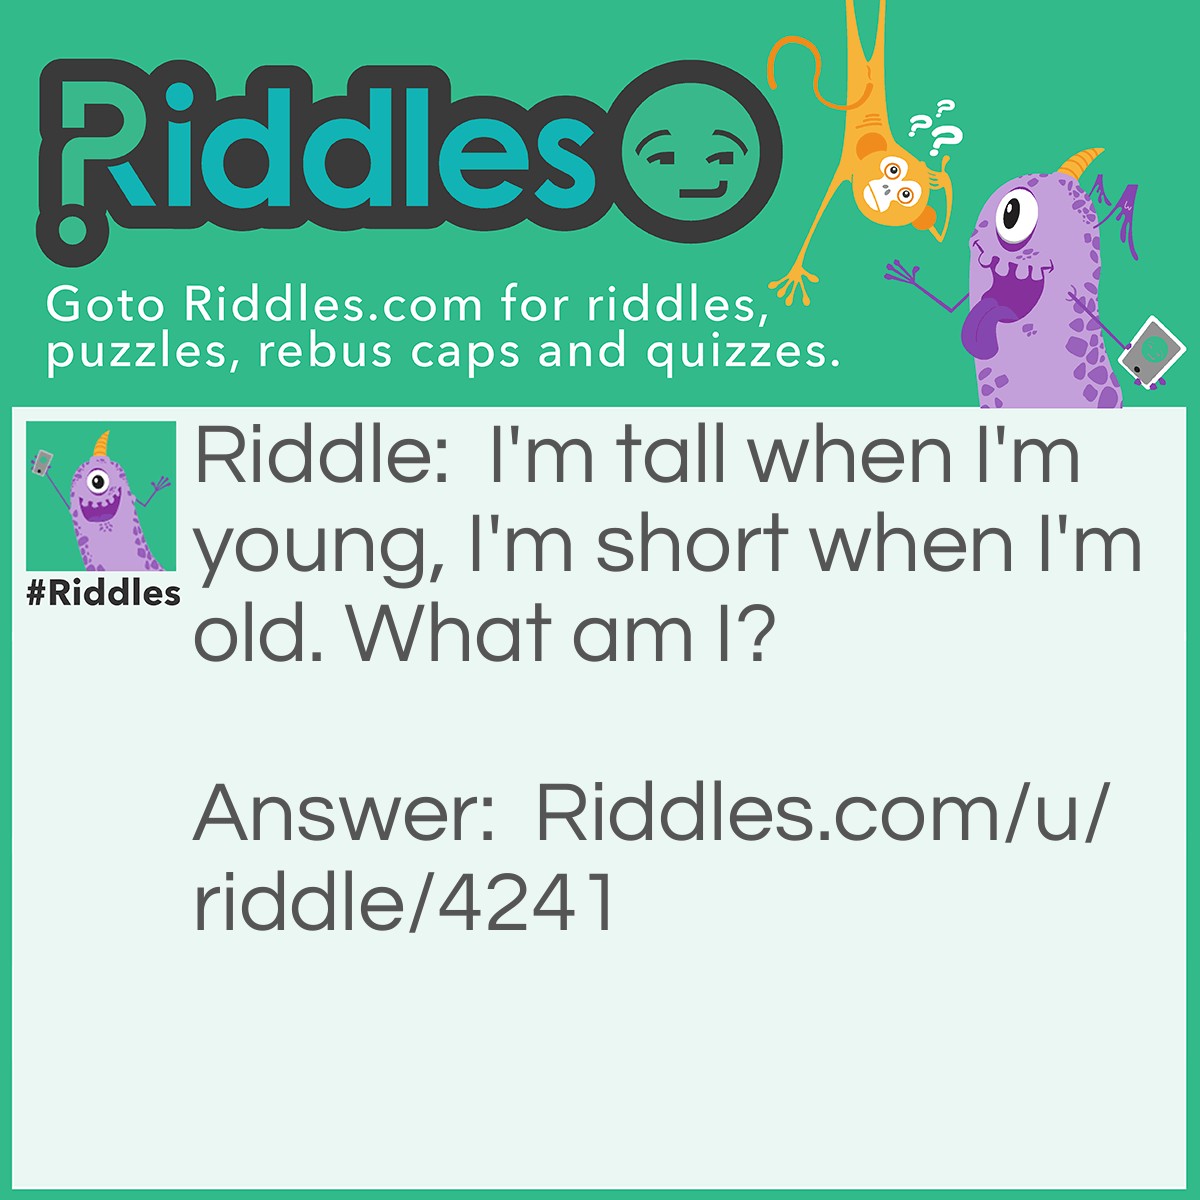 Riddle: I'm tall when I'm young, I'm short when I'm old. What am I? Answer: A candle.